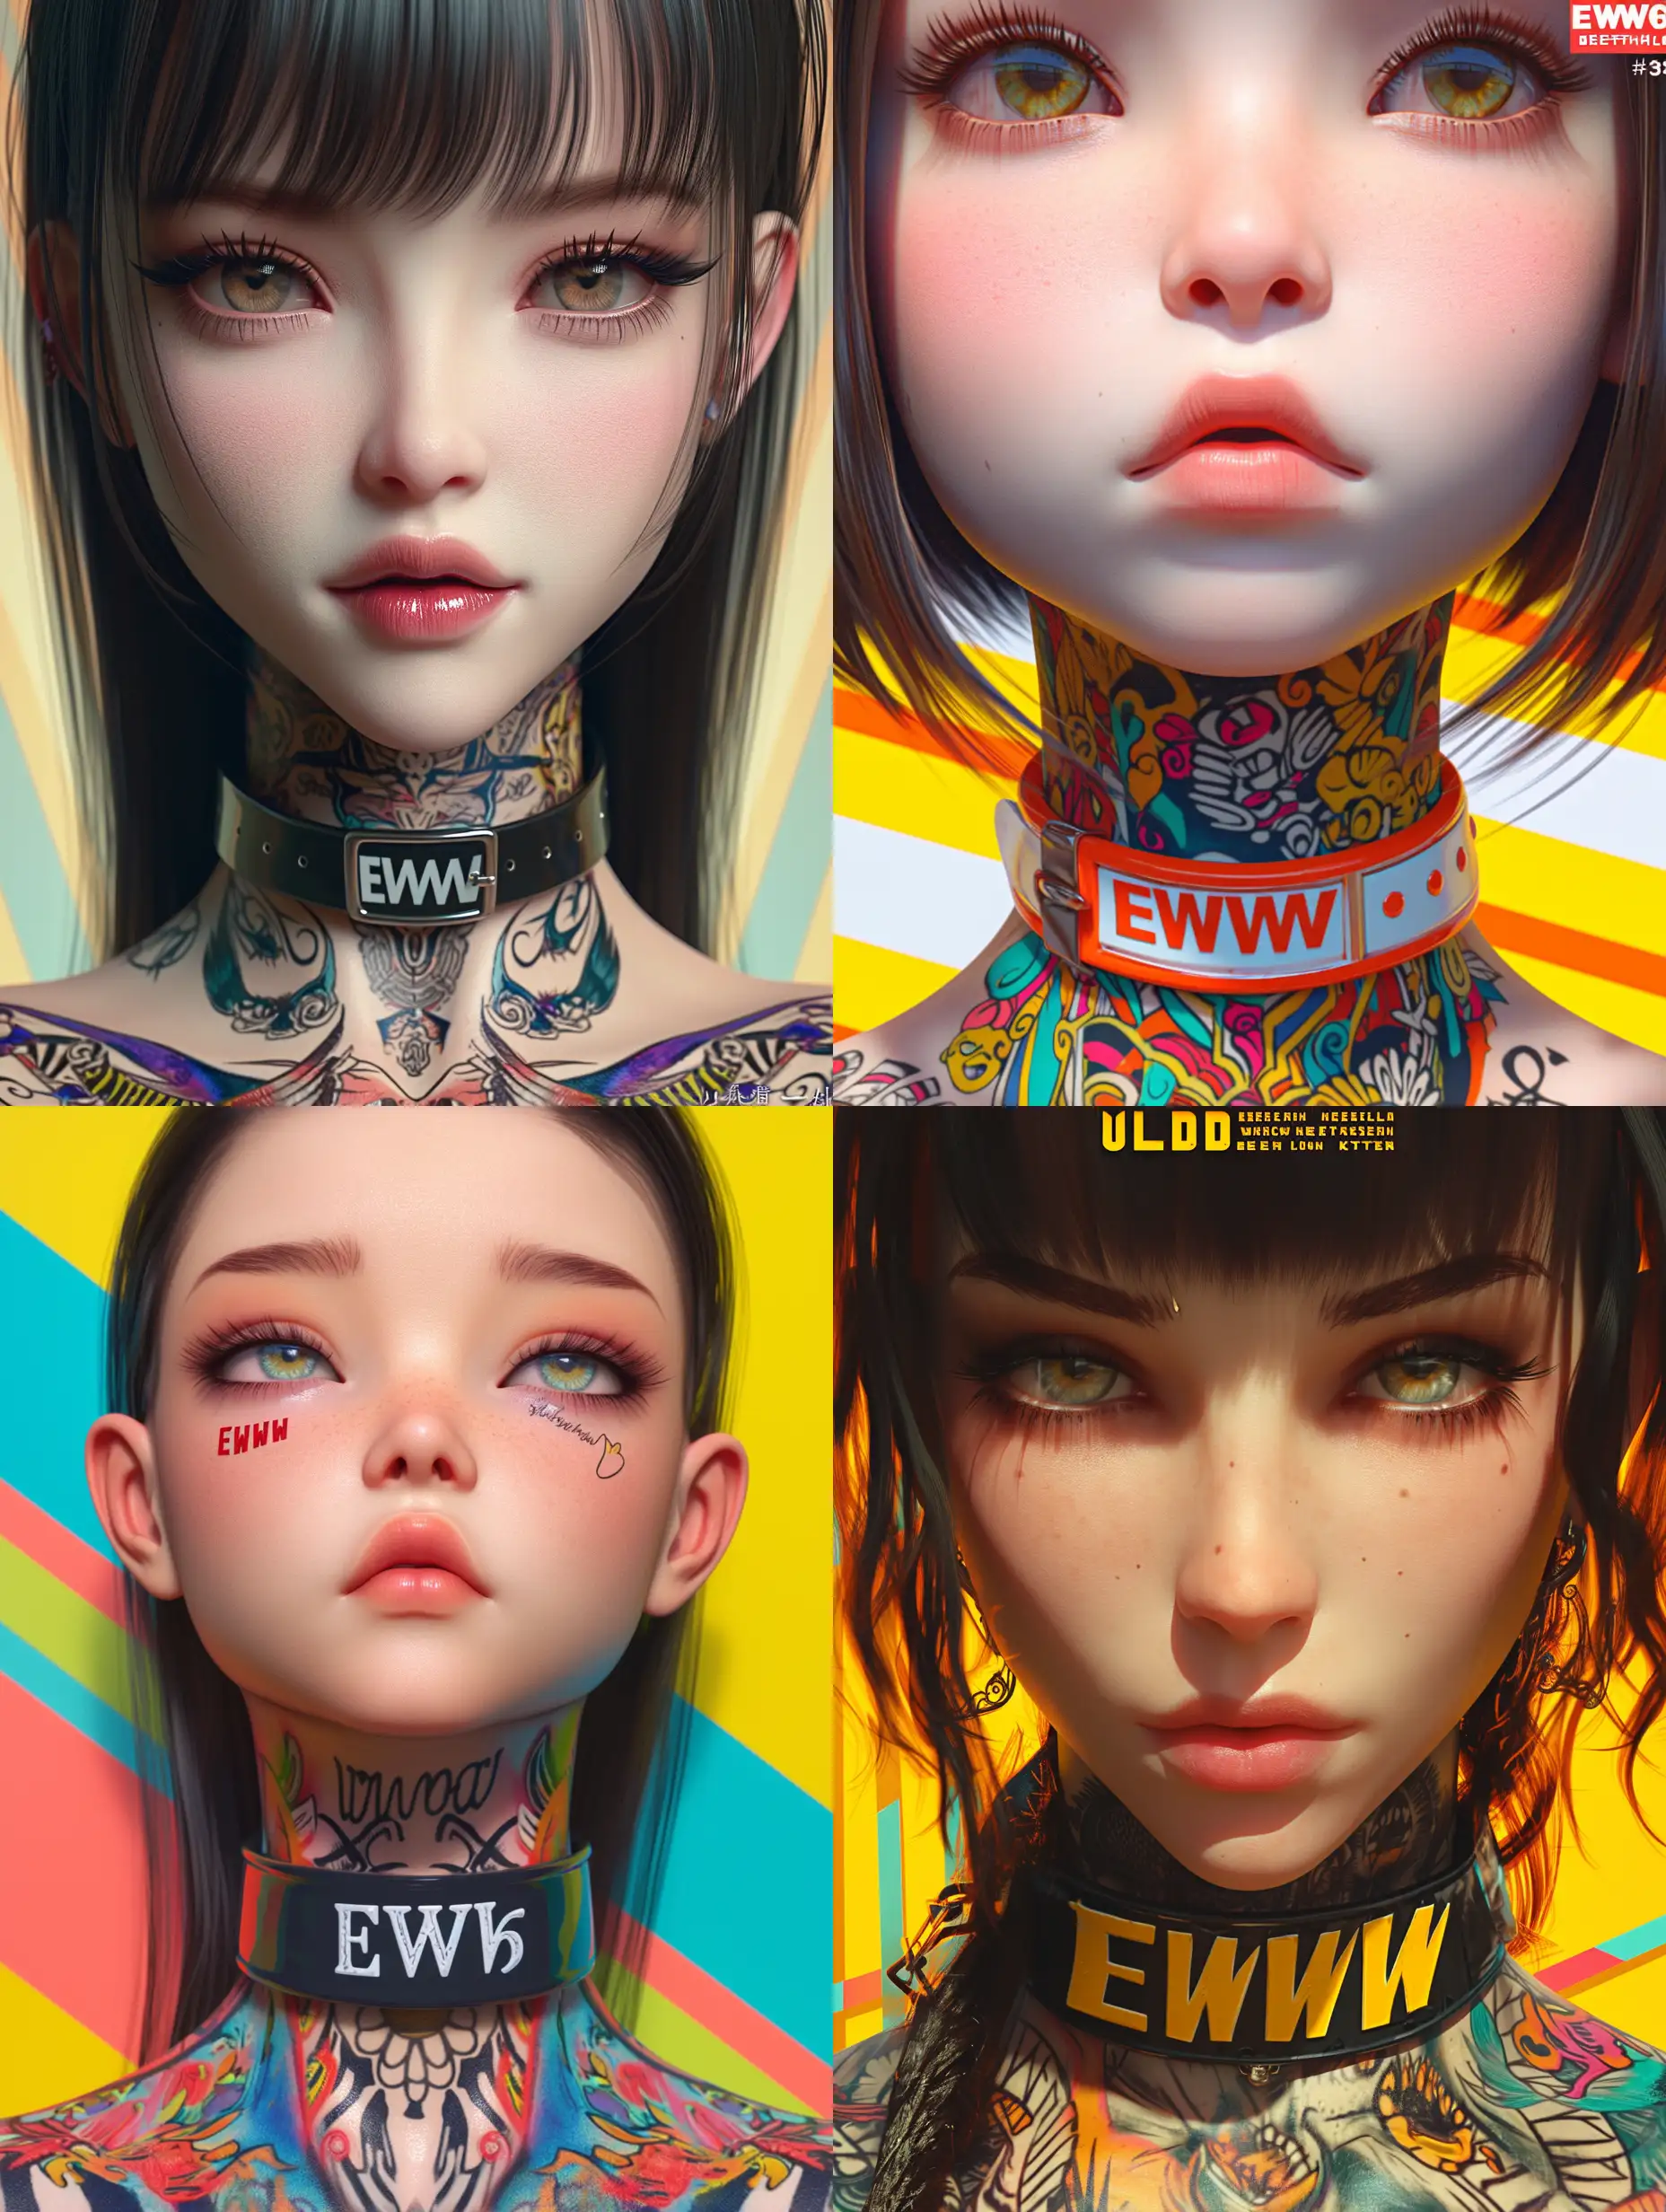  close up of a 3D girl detailed realistic expressions, long neck with comic tattoos, wlop glossy skin, loish and wlop, intricate wlop, ultra detailed face and eyes, in style of wlop, beeple and jeremiah ketner, wlop art, Daz 3D, wlop |, great digital art with details, wlop loish and clamp style, stunning digital illustration, collar with the inscription "EWW", realistic 3D skin, stripe background, :: anime::-0.1 --niji 6 --s 250